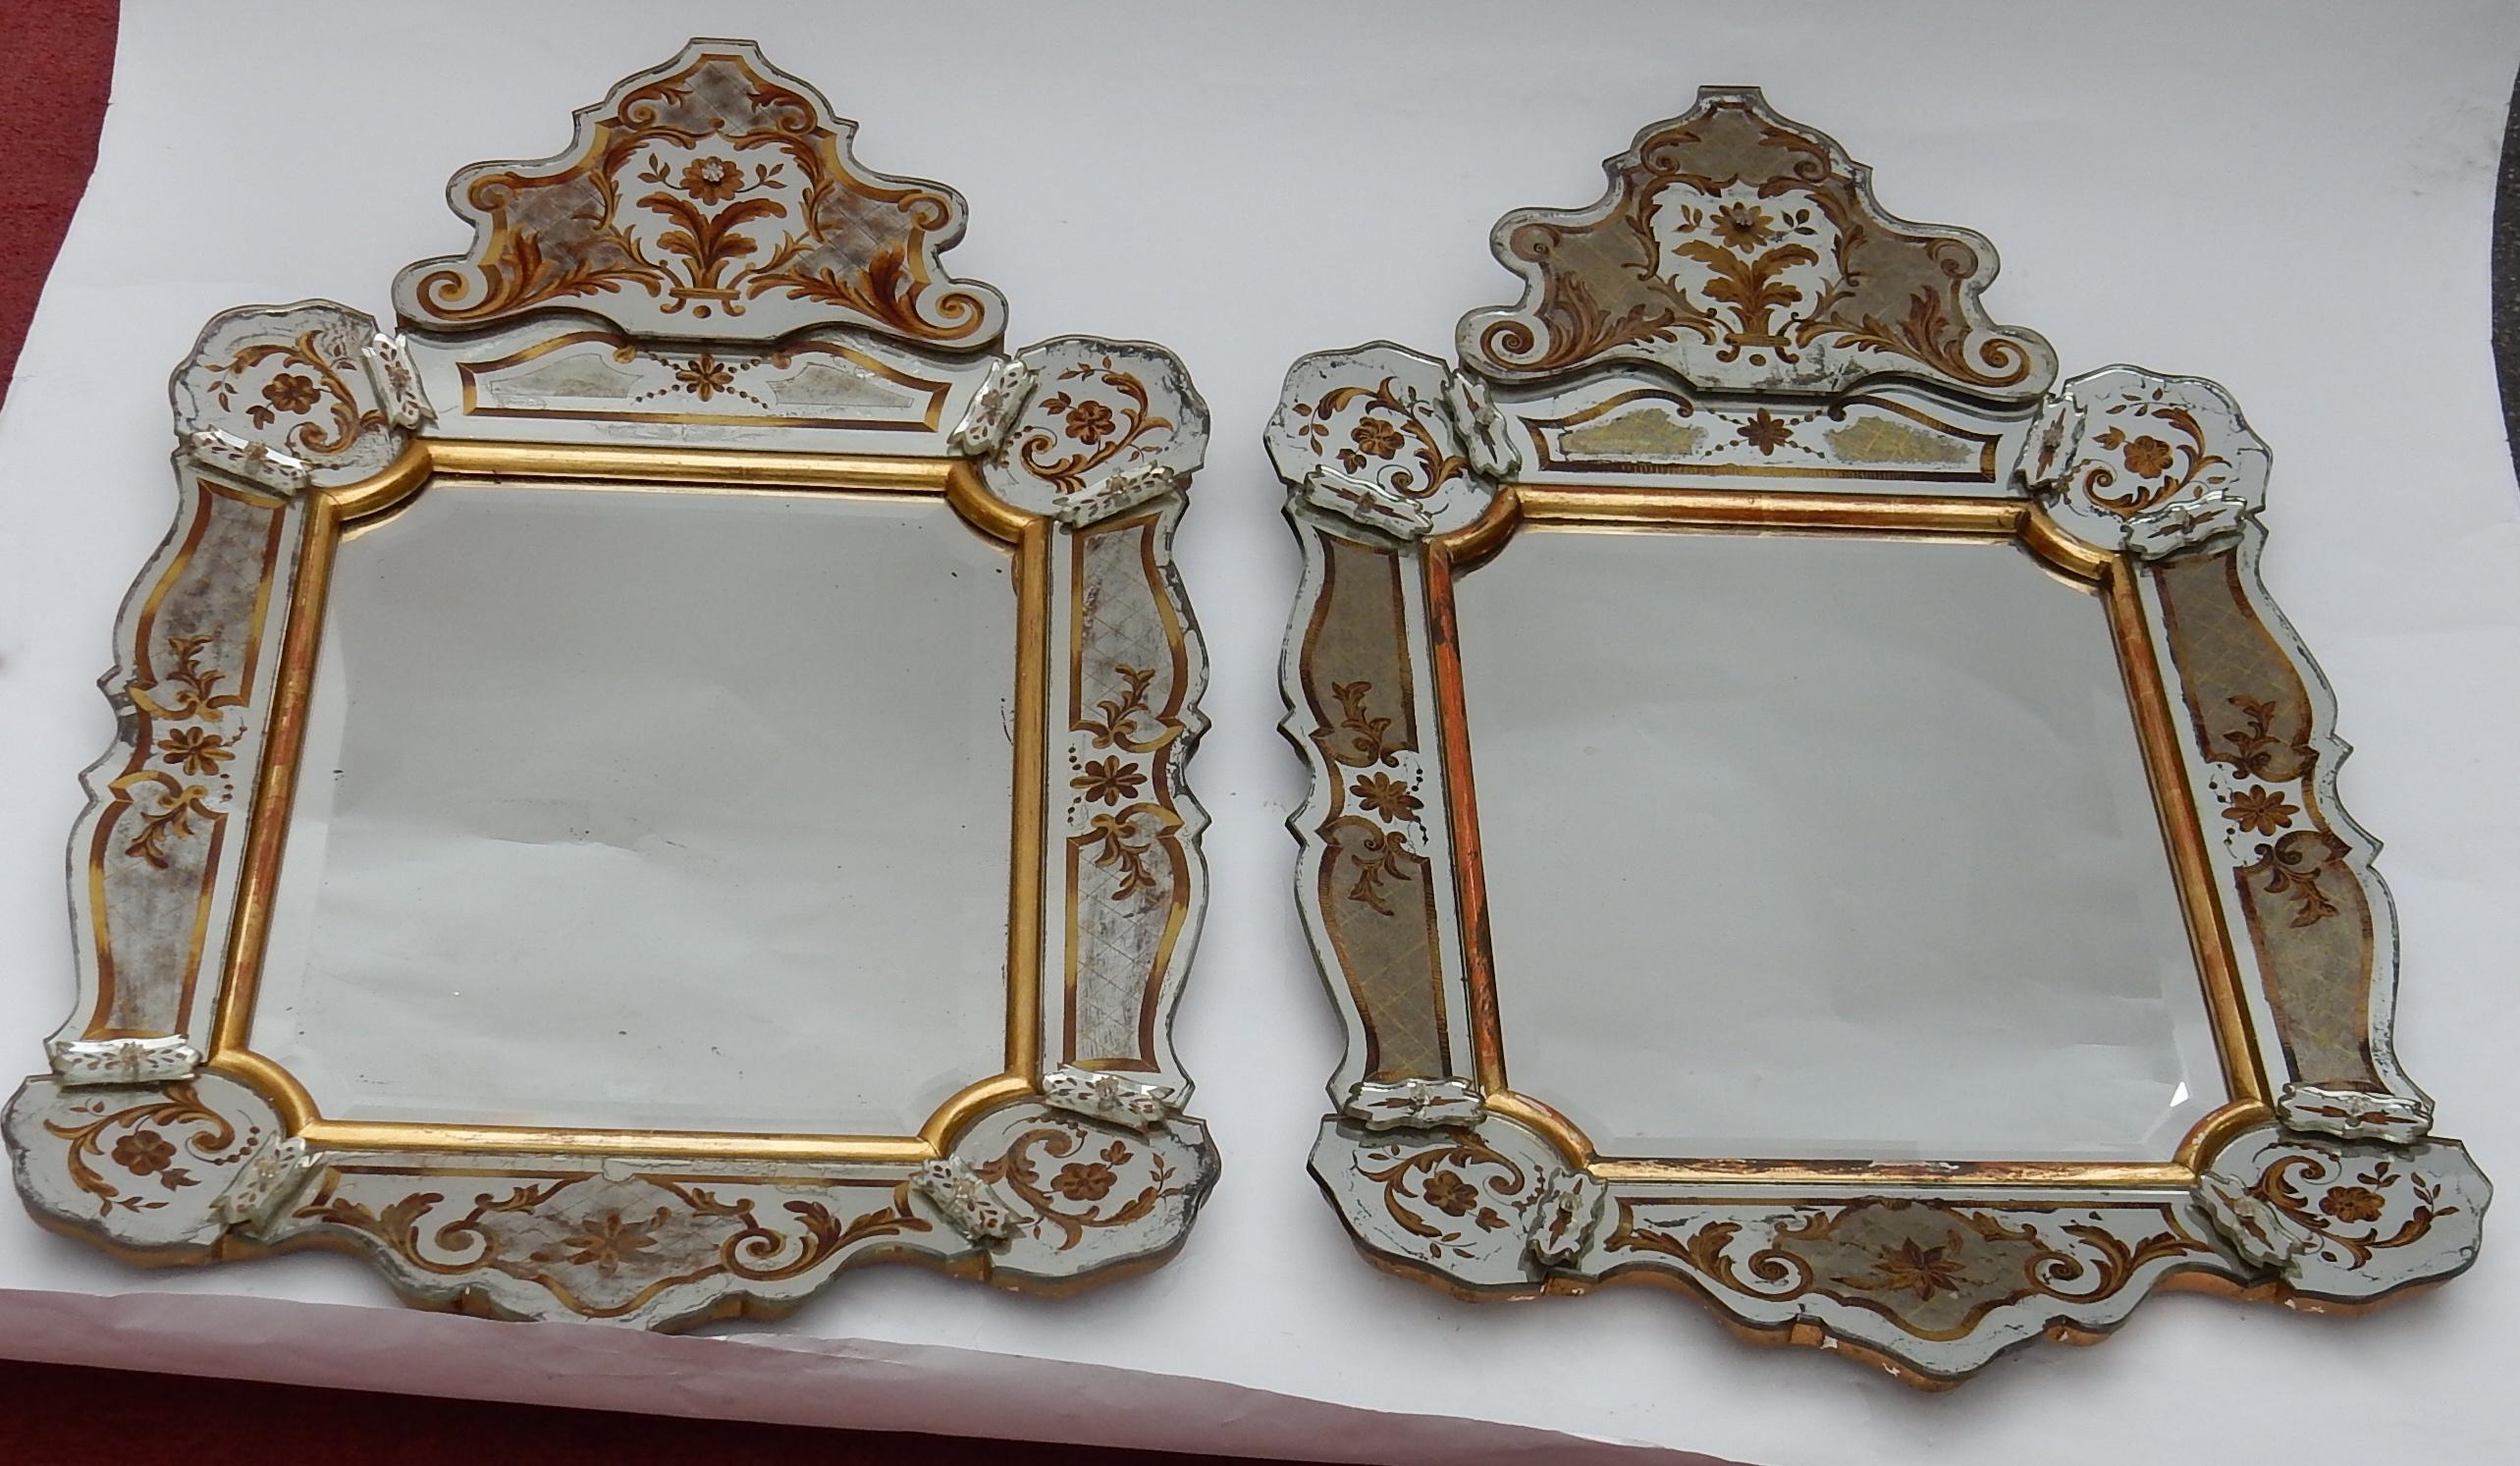 Giltwood 1950-1970 Pair of Mirrors with Decors Eglomised